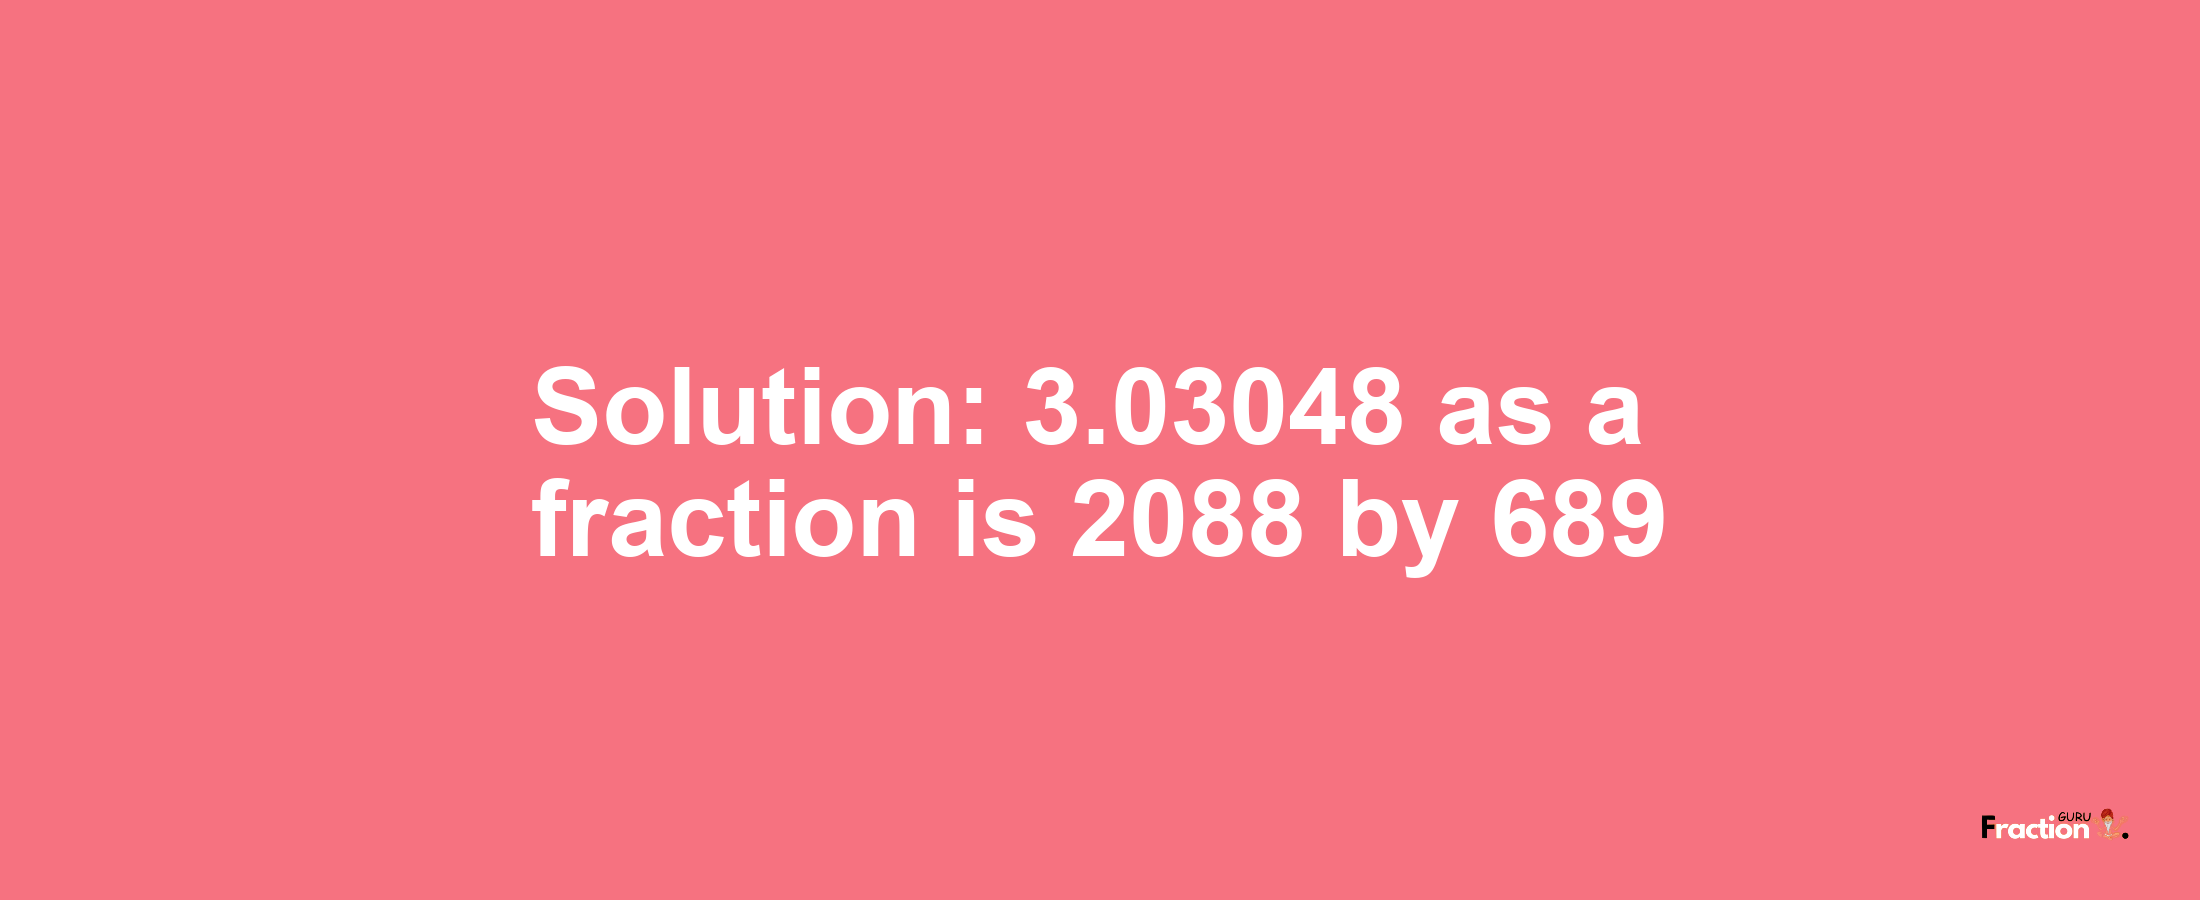 Solution:3.03048 as a fraction is 2088/689